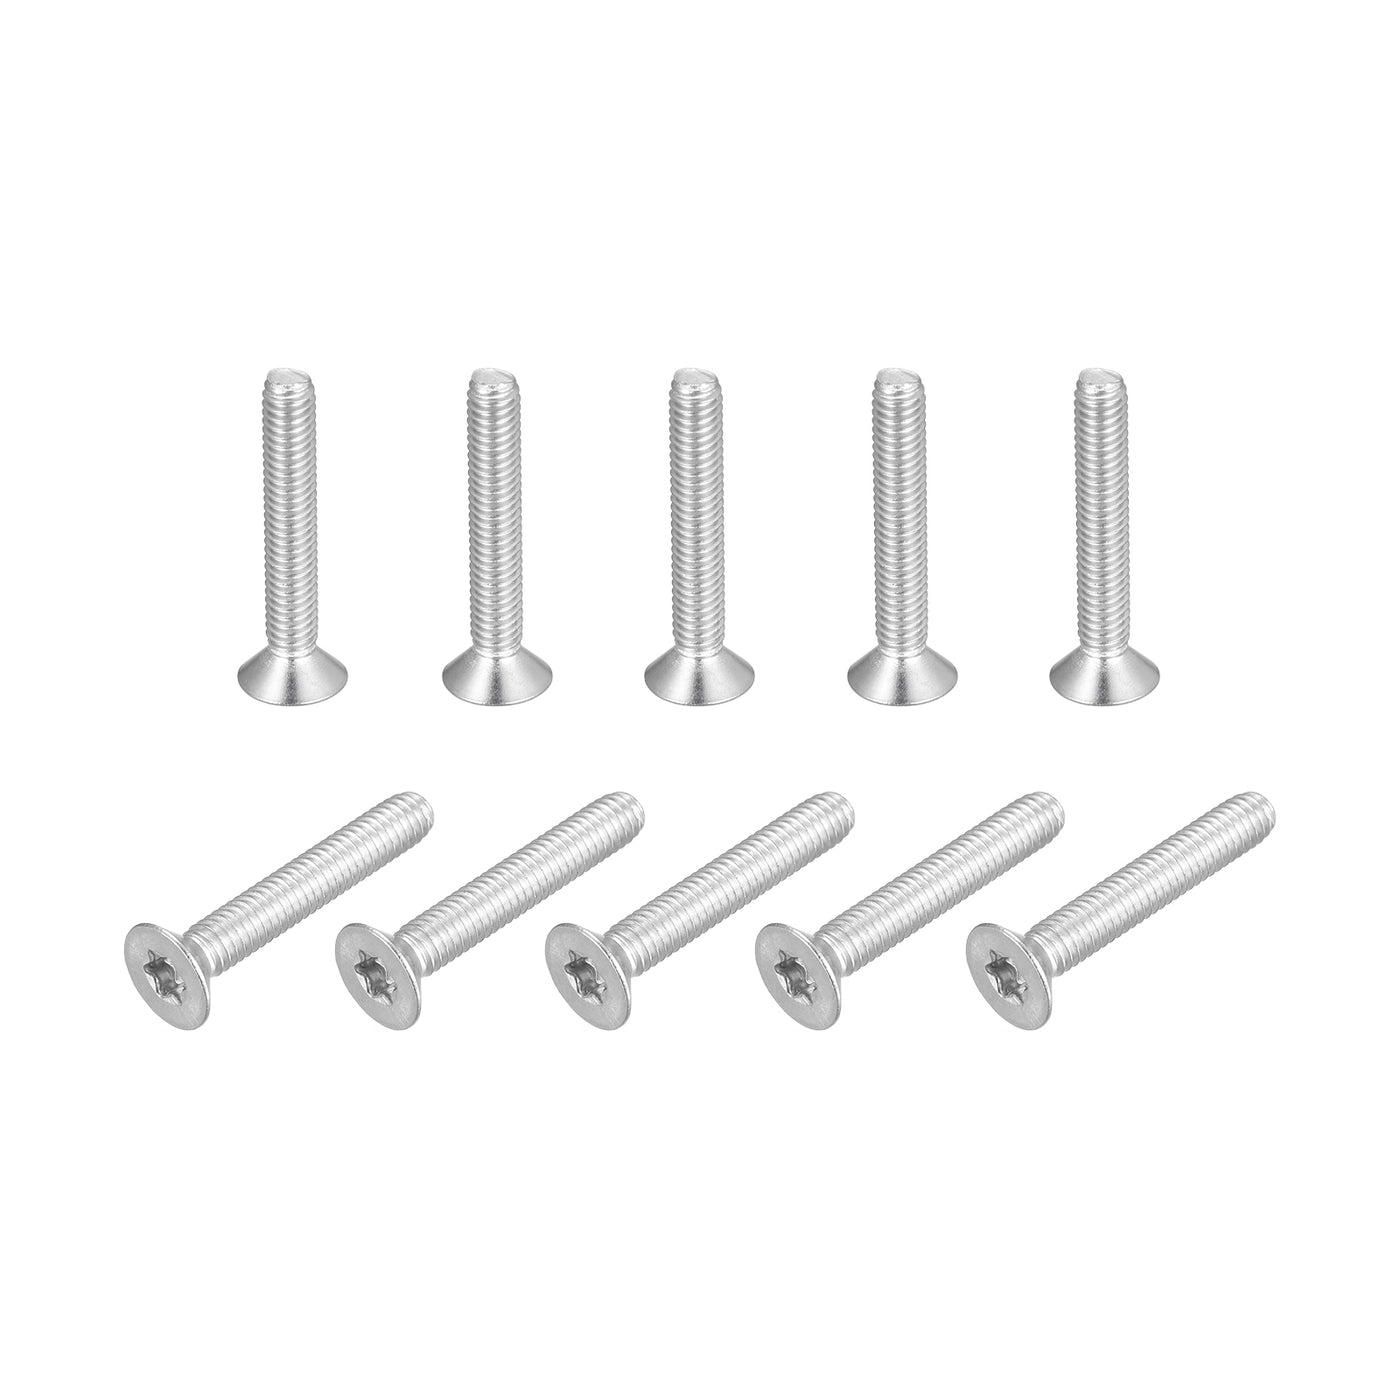 uxcell Uxcell M4x25mm Torx Security Screws, 10pcs 316 Stainless Steel Countersunk Head Screw